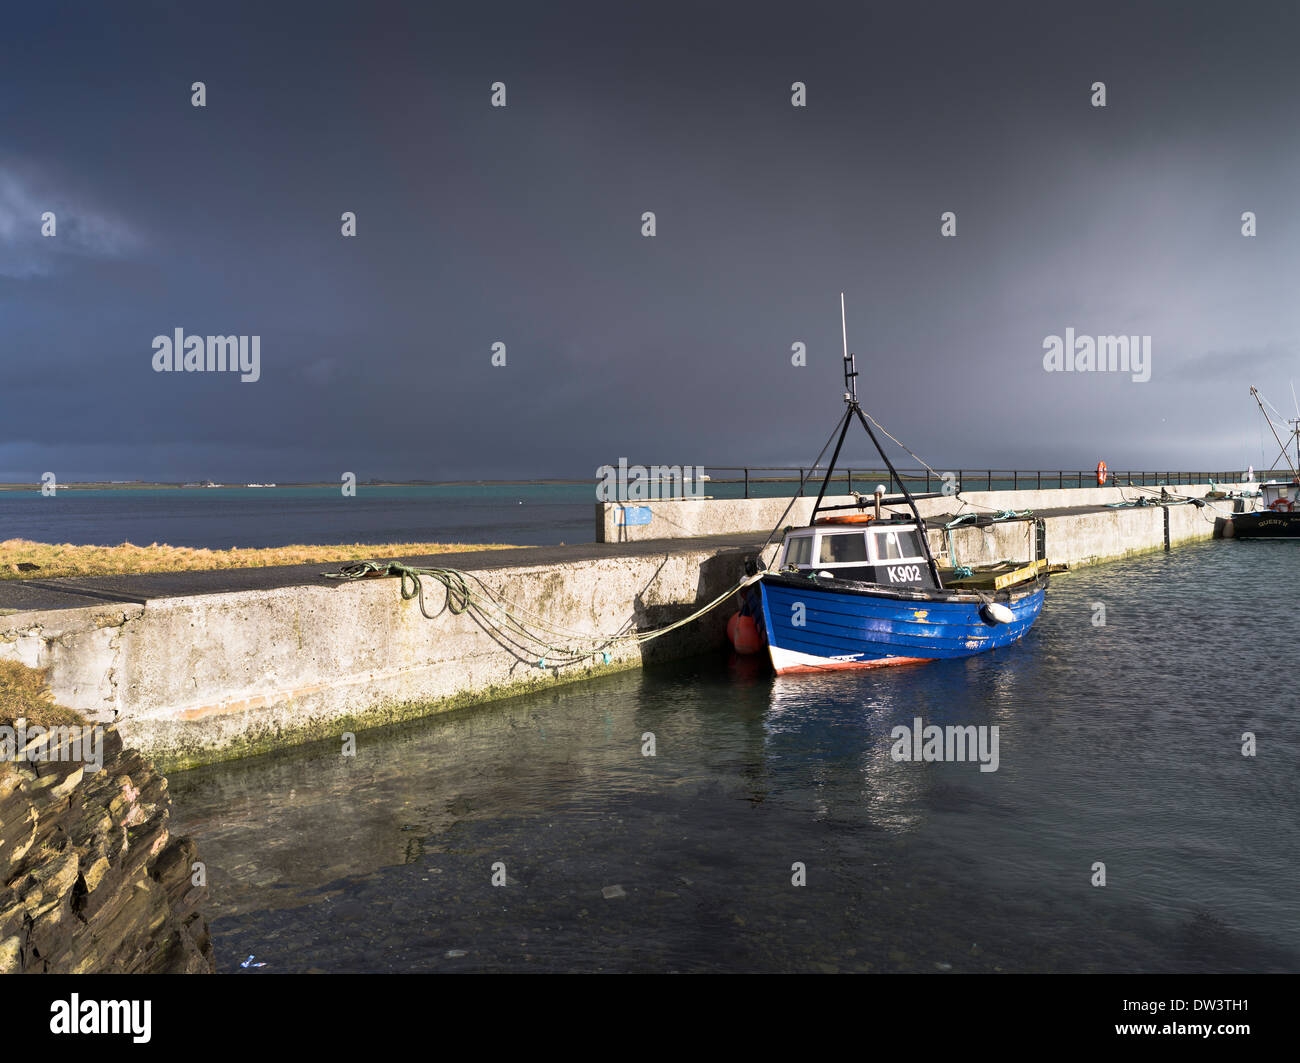 dh Kettletoft harbour SANDAY ORKNEY Gathering storm approaching fishing boat harbour pier scotland dramatic sky boats sea sunny Stock Photo